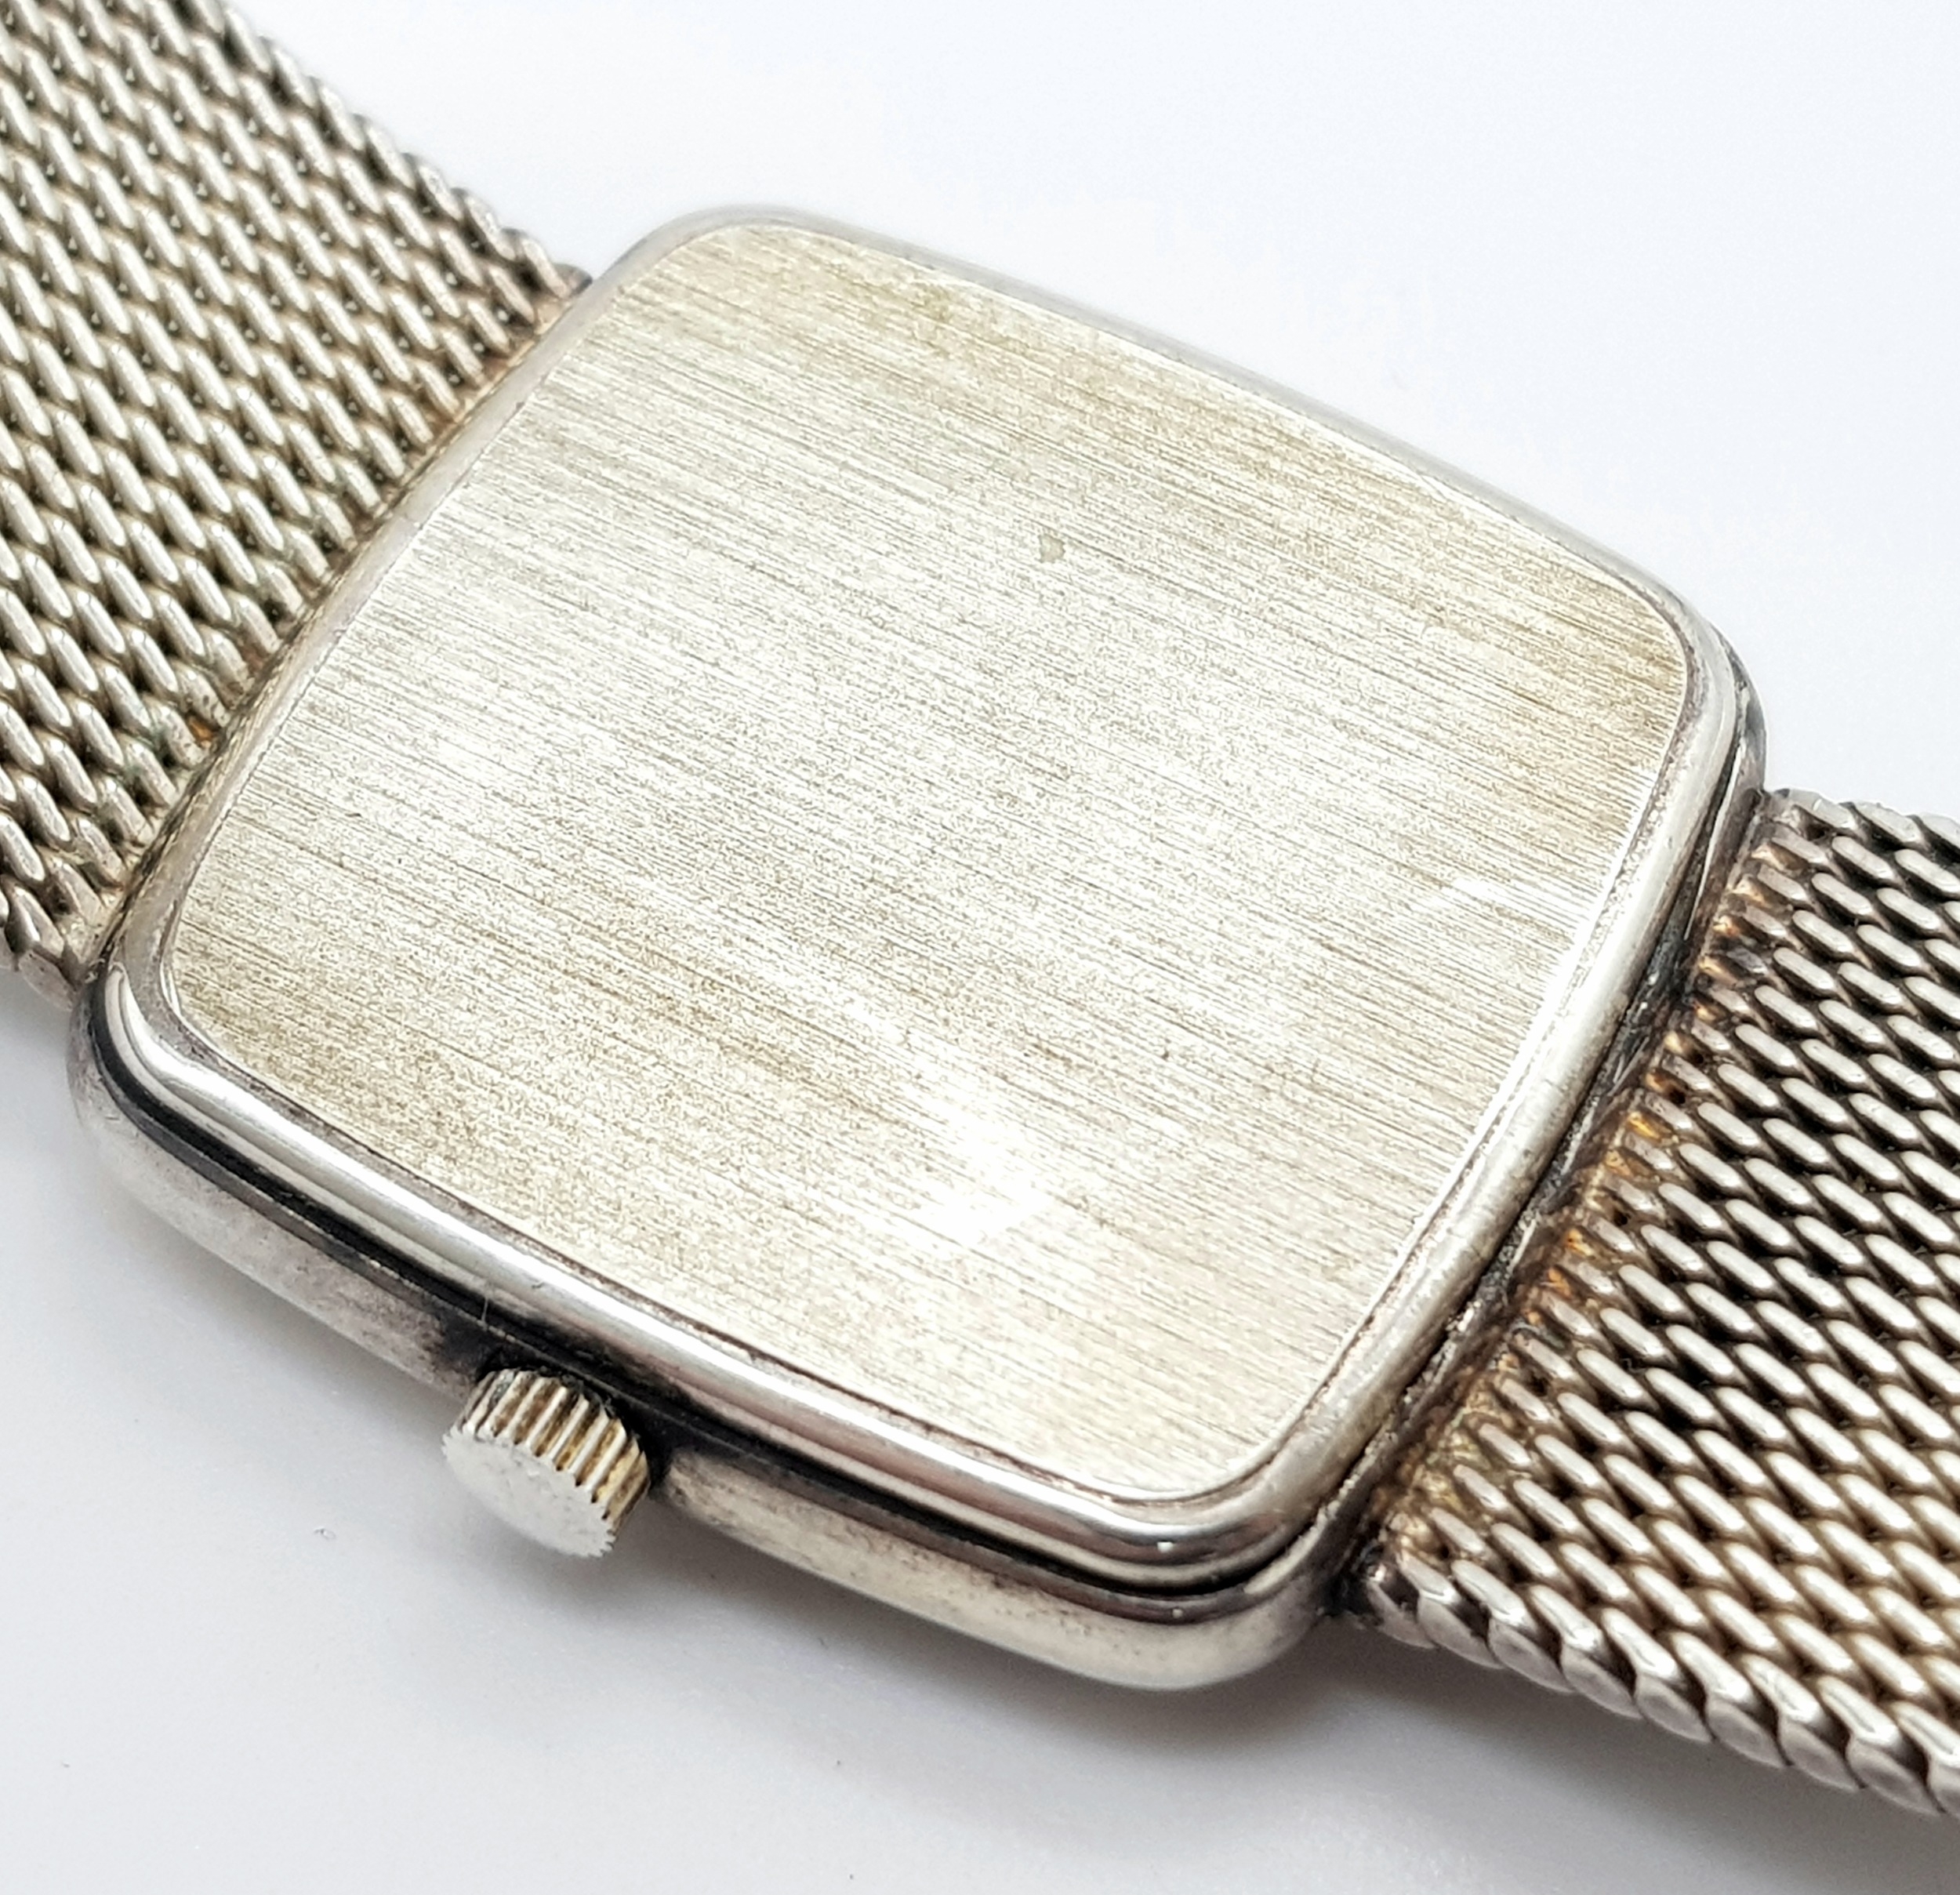 A Rare Garrard Sterling Silver Gents Quartz Watch. Sterling silver bracelet and case - 29mm. White - Image 4 of 8